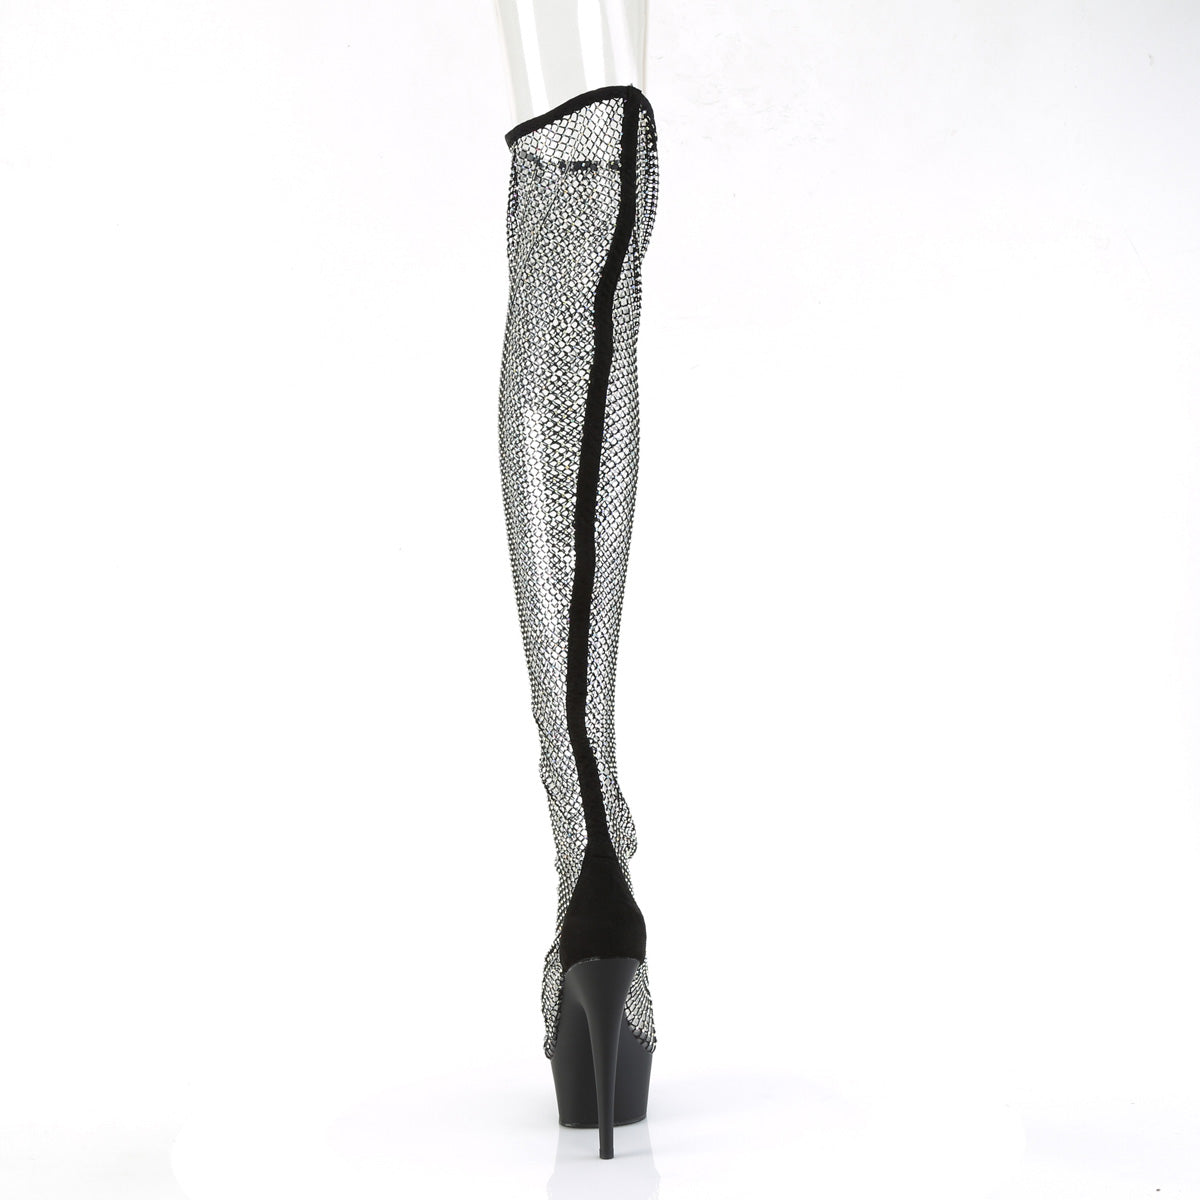 DELIGHT-3009 Pull-On Mesh Thigh High Boot Black Multi view 2